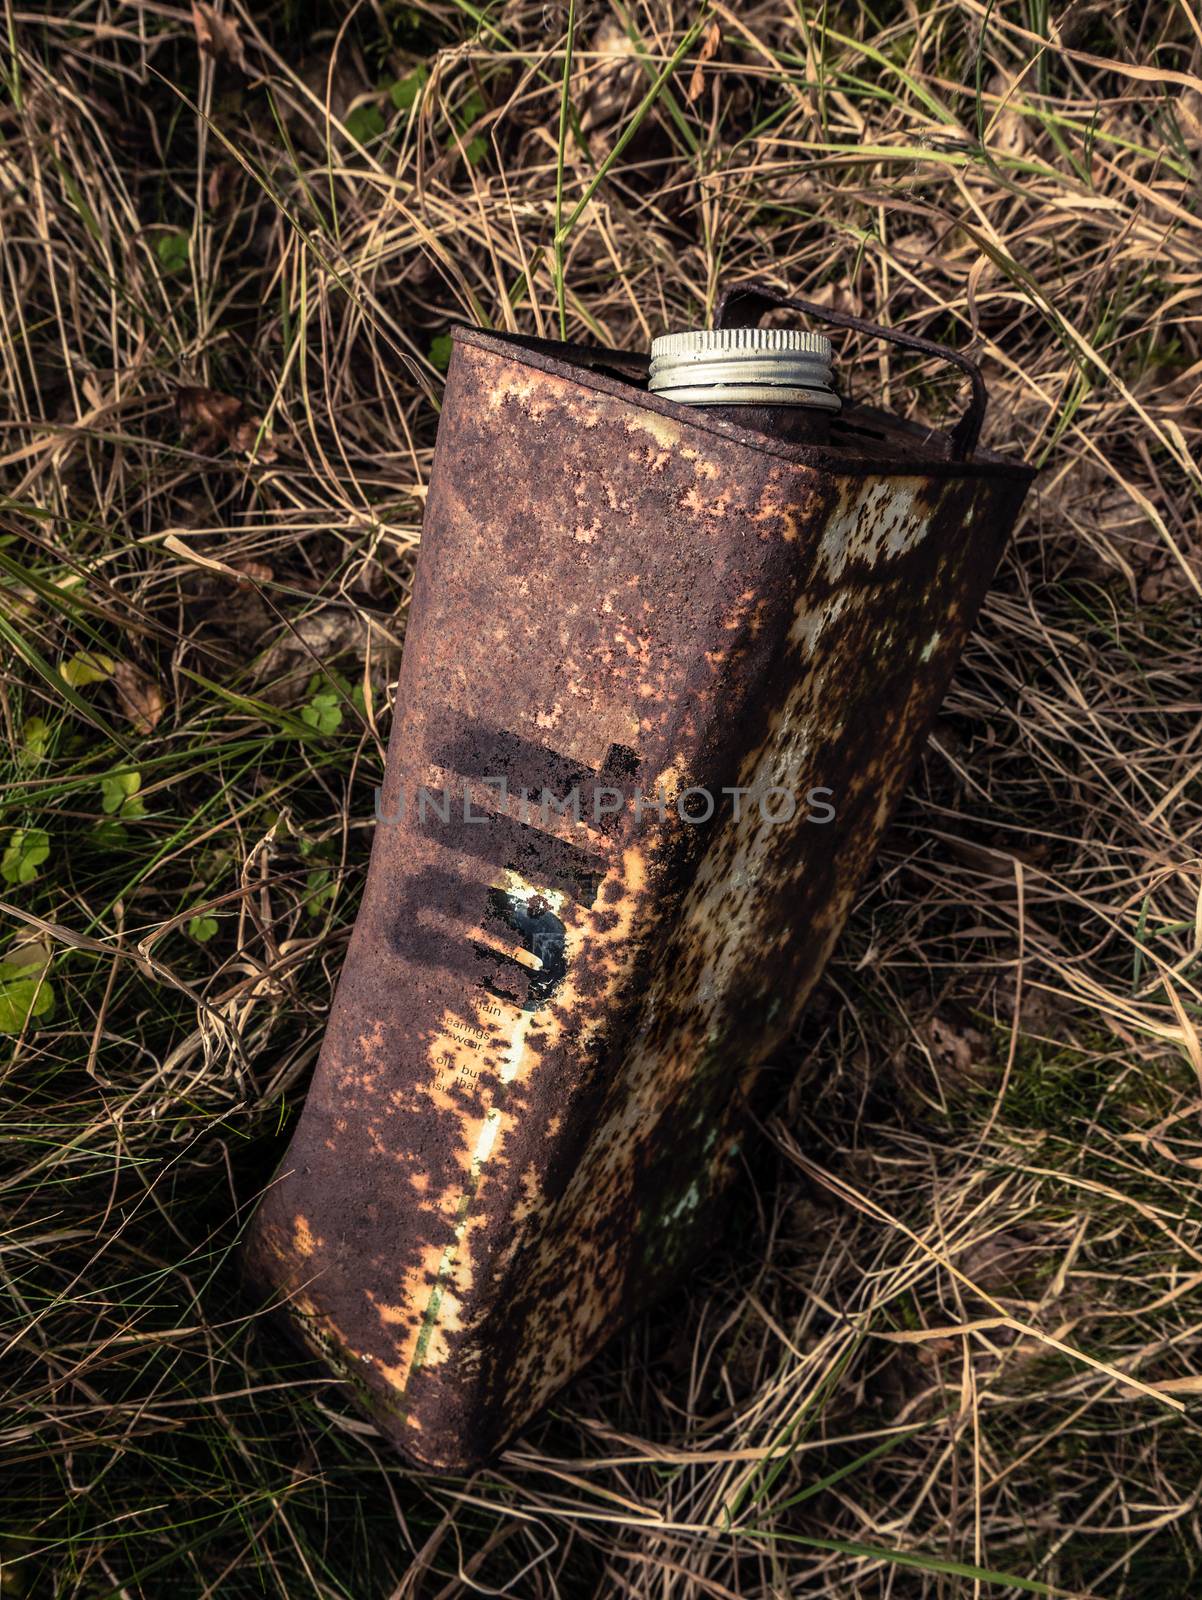 Conceptual Image Of An Old Rusty Oil Can Abandoned In The Undergrowth